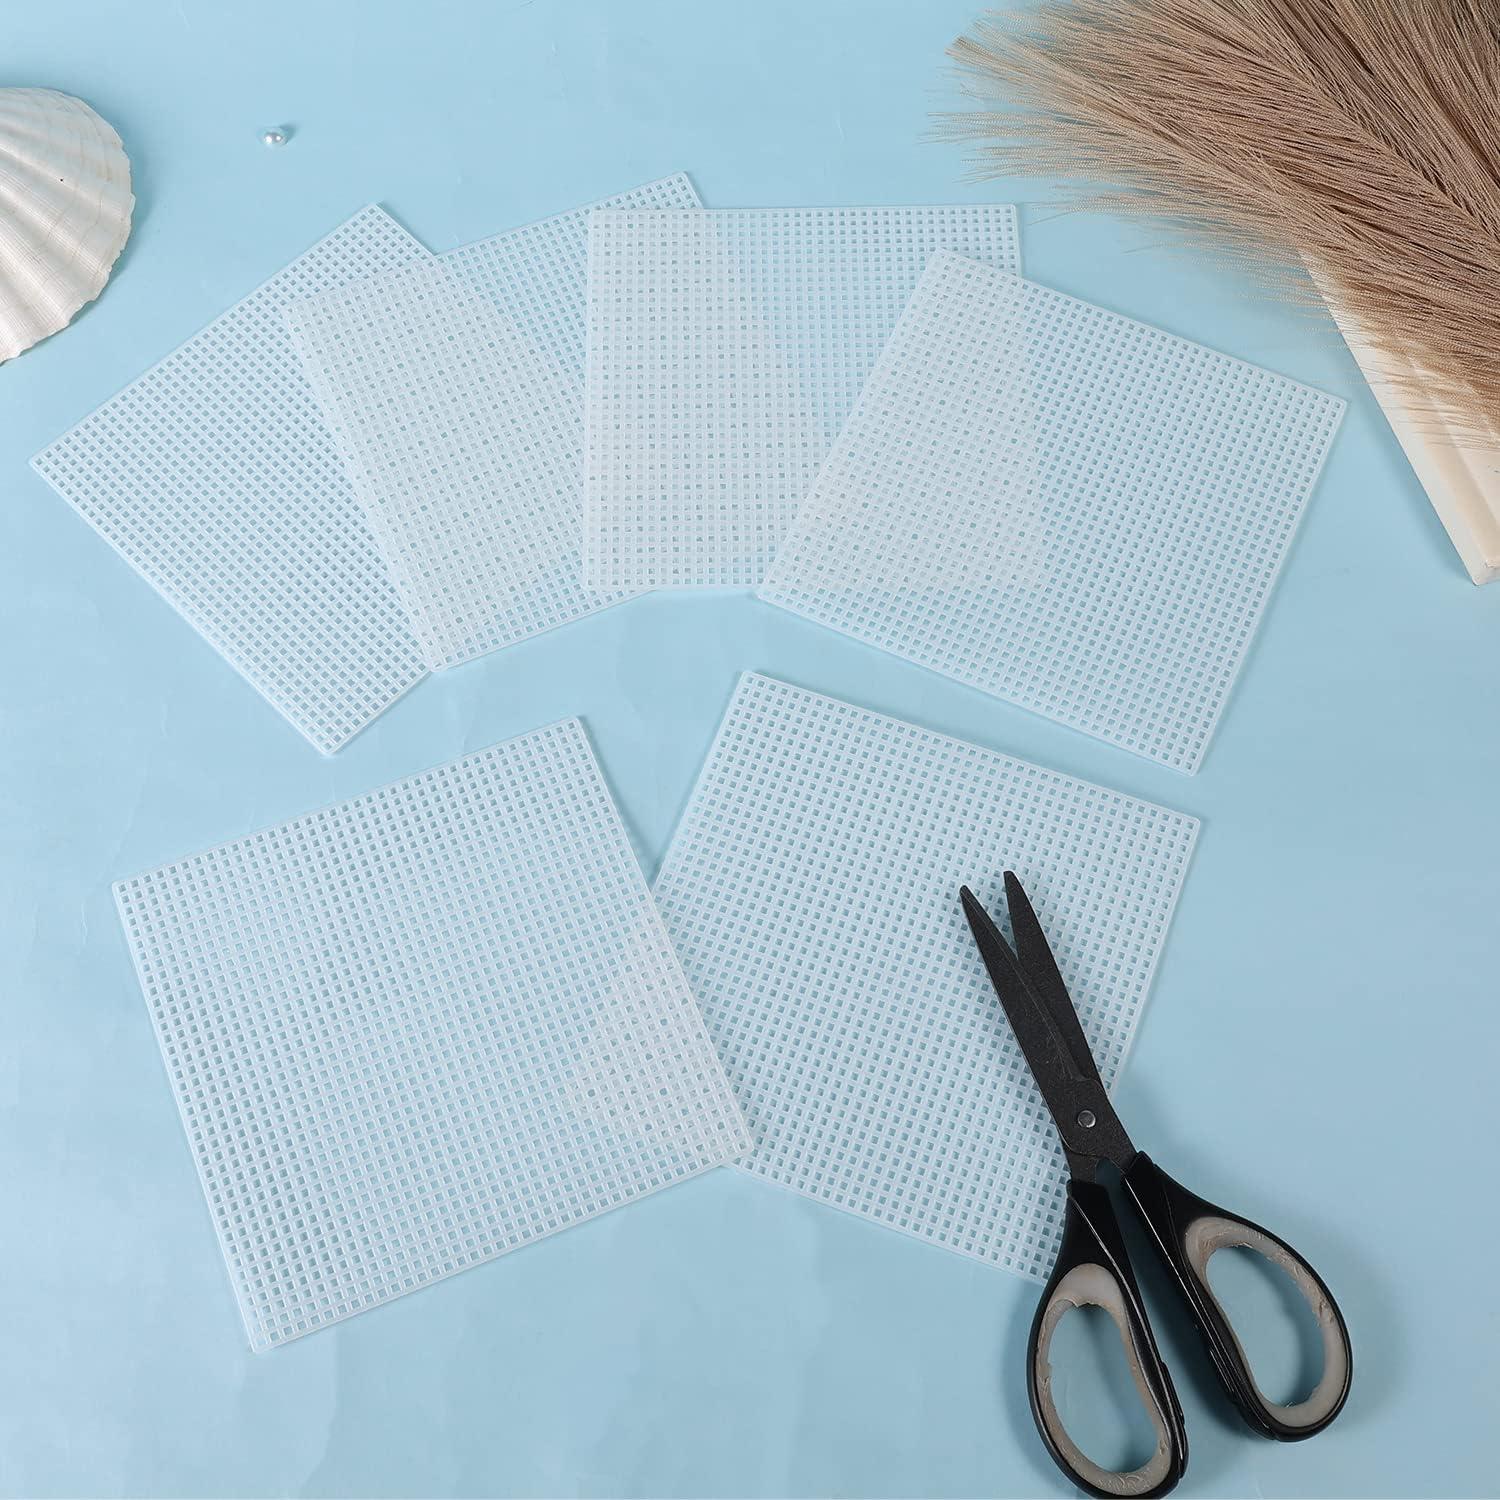 20 Sheets Plastic Canvas, 7CT Clear Plastic Mesh Canvas Sheets for  Embroidery, Cross Stitch Plastic Aida Plastic Mesh Screen for Crafts DIY  Crochet Projects (5.4x5.4inch)